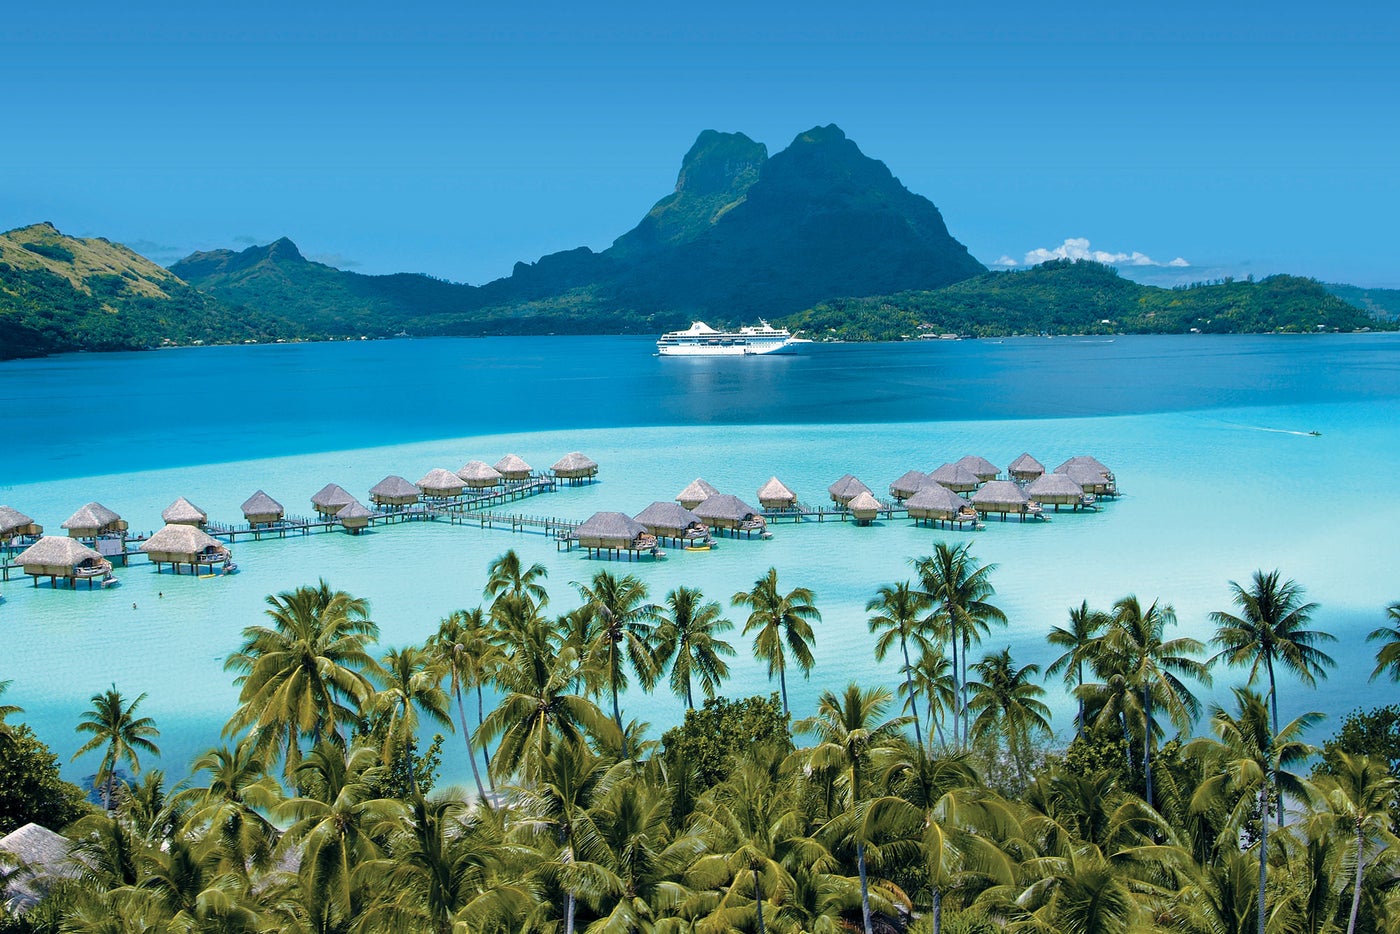 Bora Bora for the day: What to do while your cruise is in port